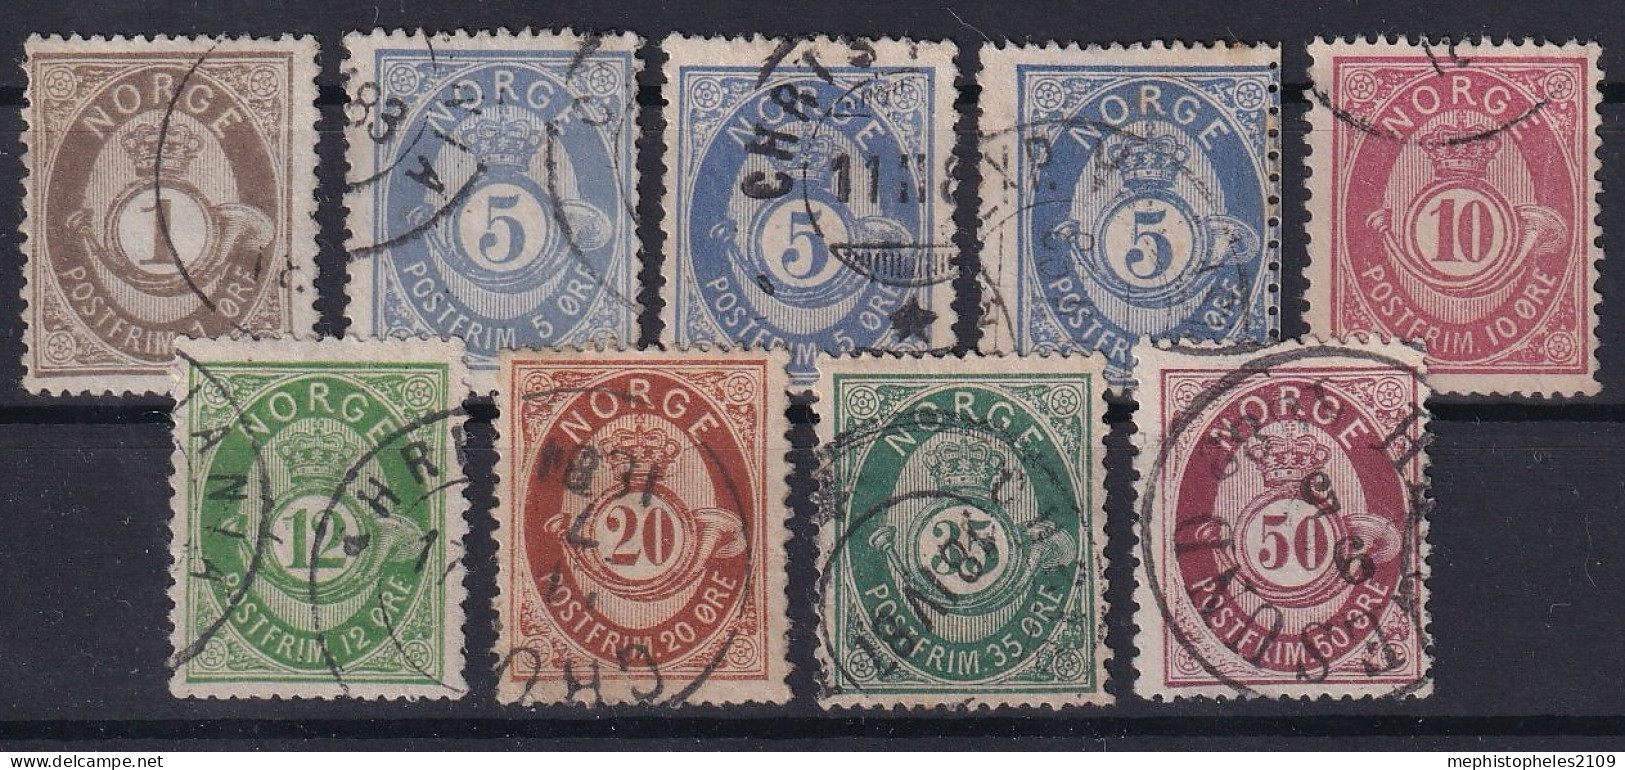 NORWAY 1877/78 - Canceled - Sc# 22, 24, 24a, 24b, 25, 26, 27, 29, 30 - Used Stamps